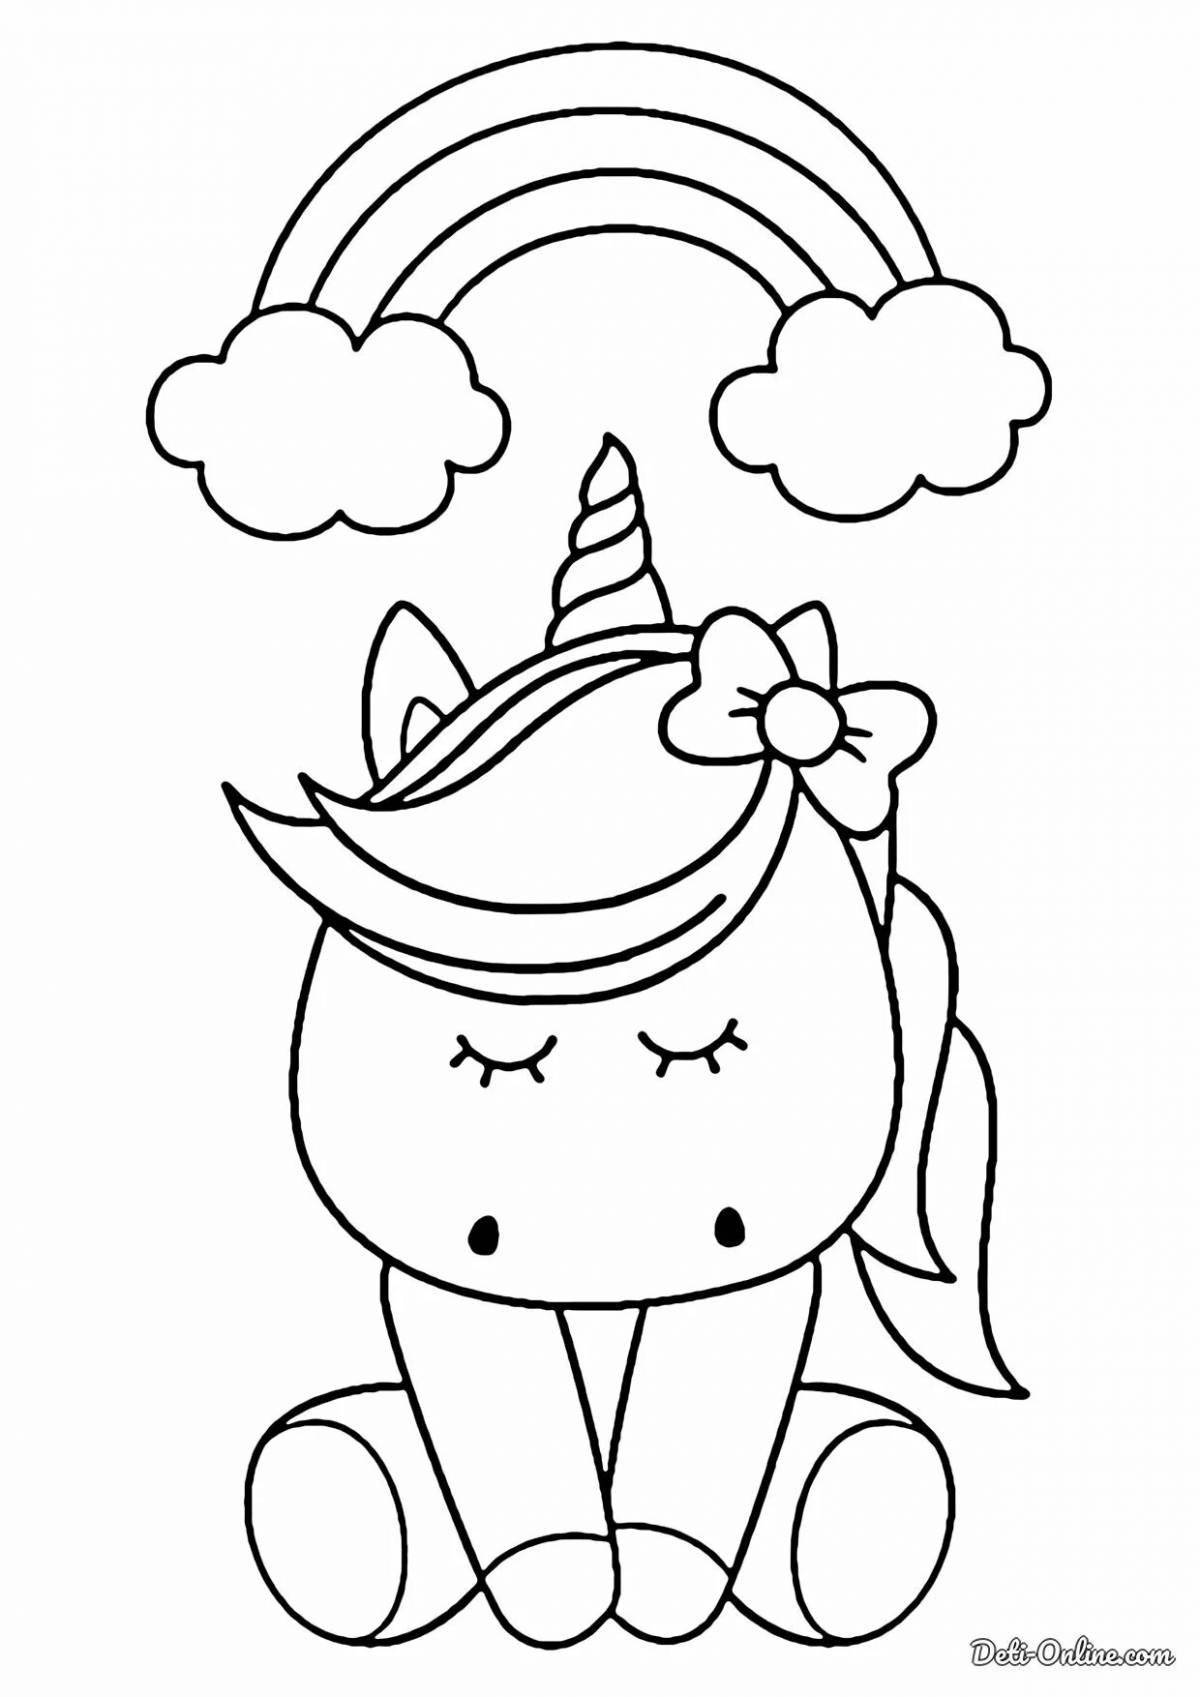 Great coloring book for girls cute unicorns